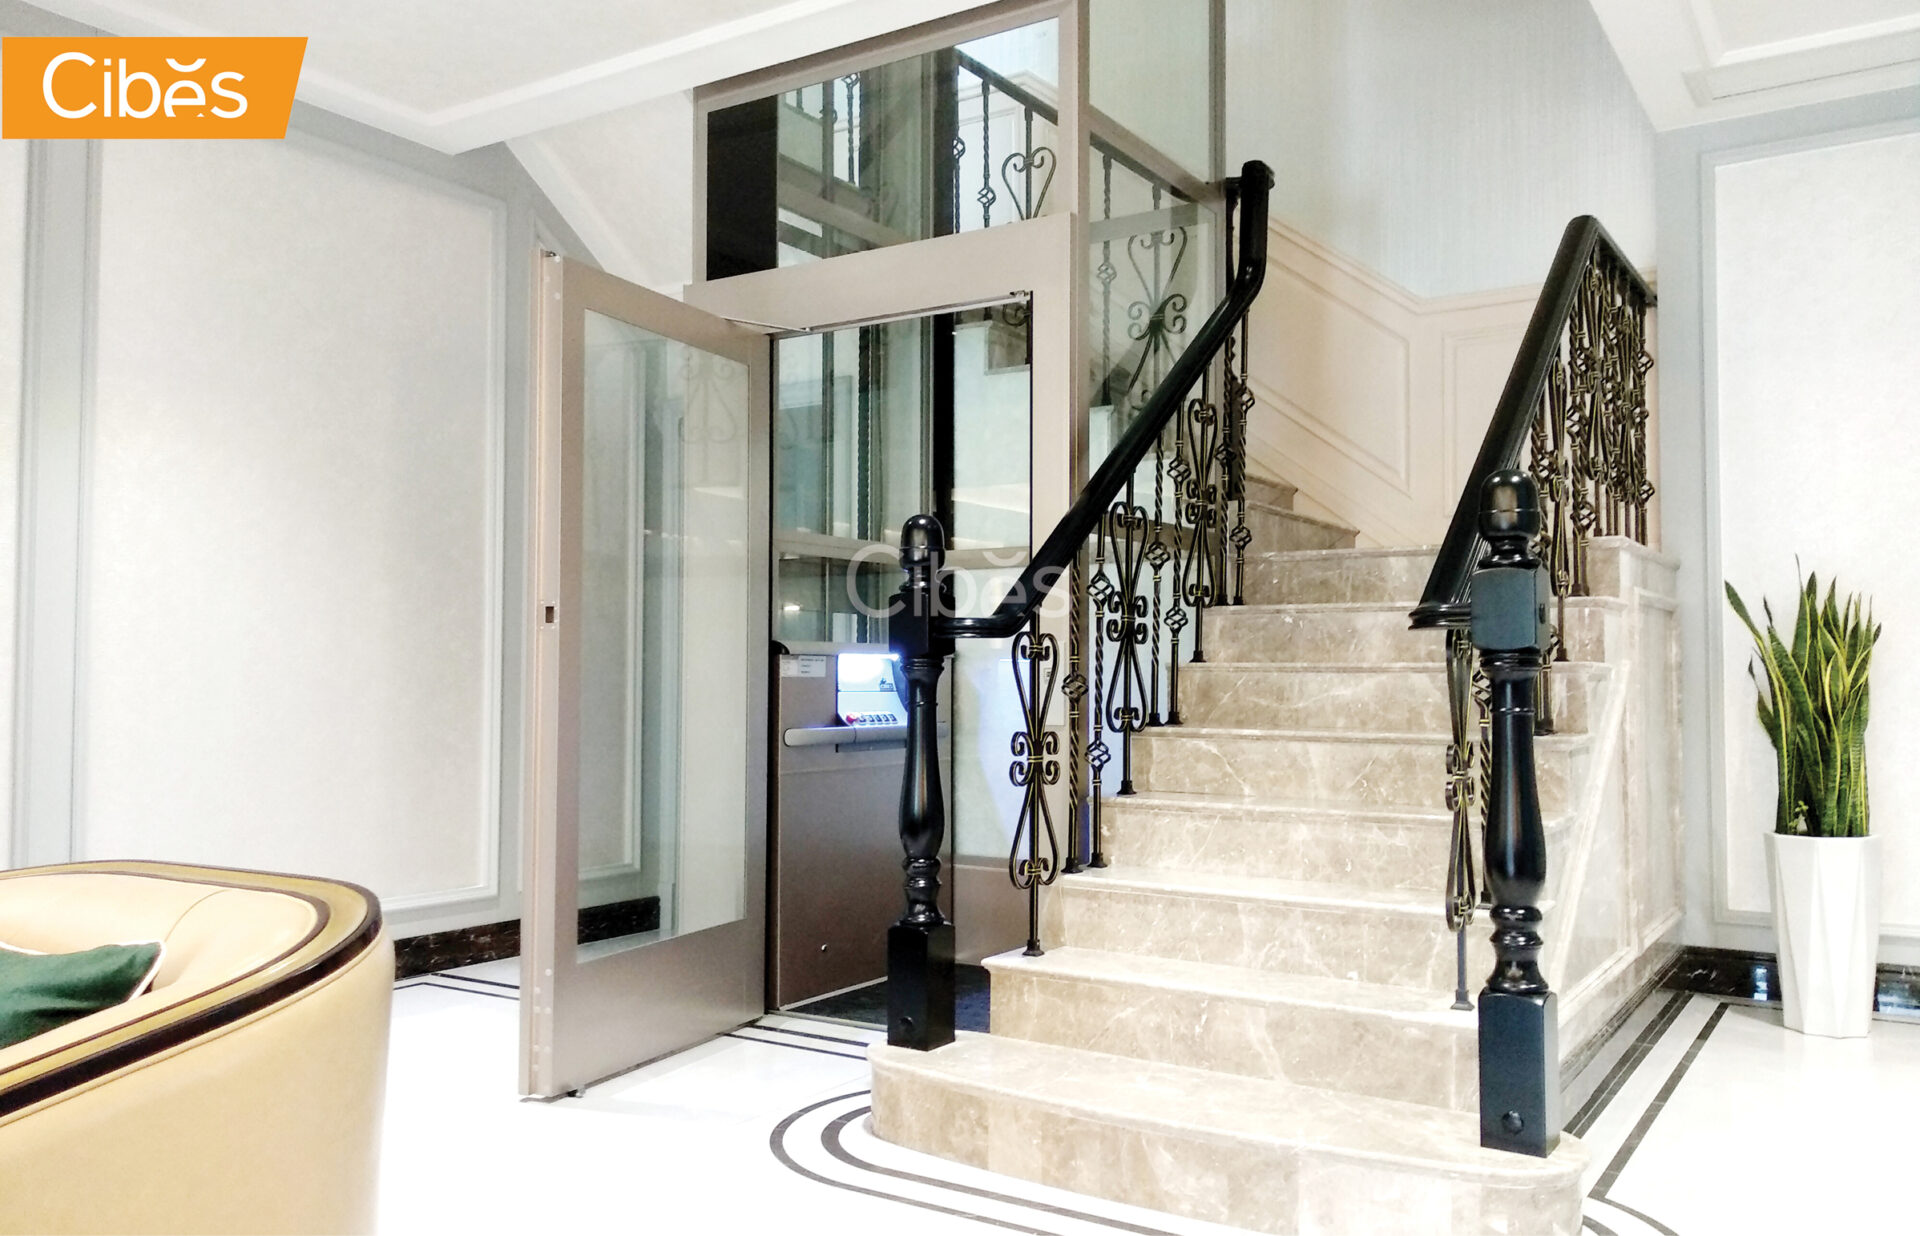 HOME LIFTS – Middle of stairs clas37